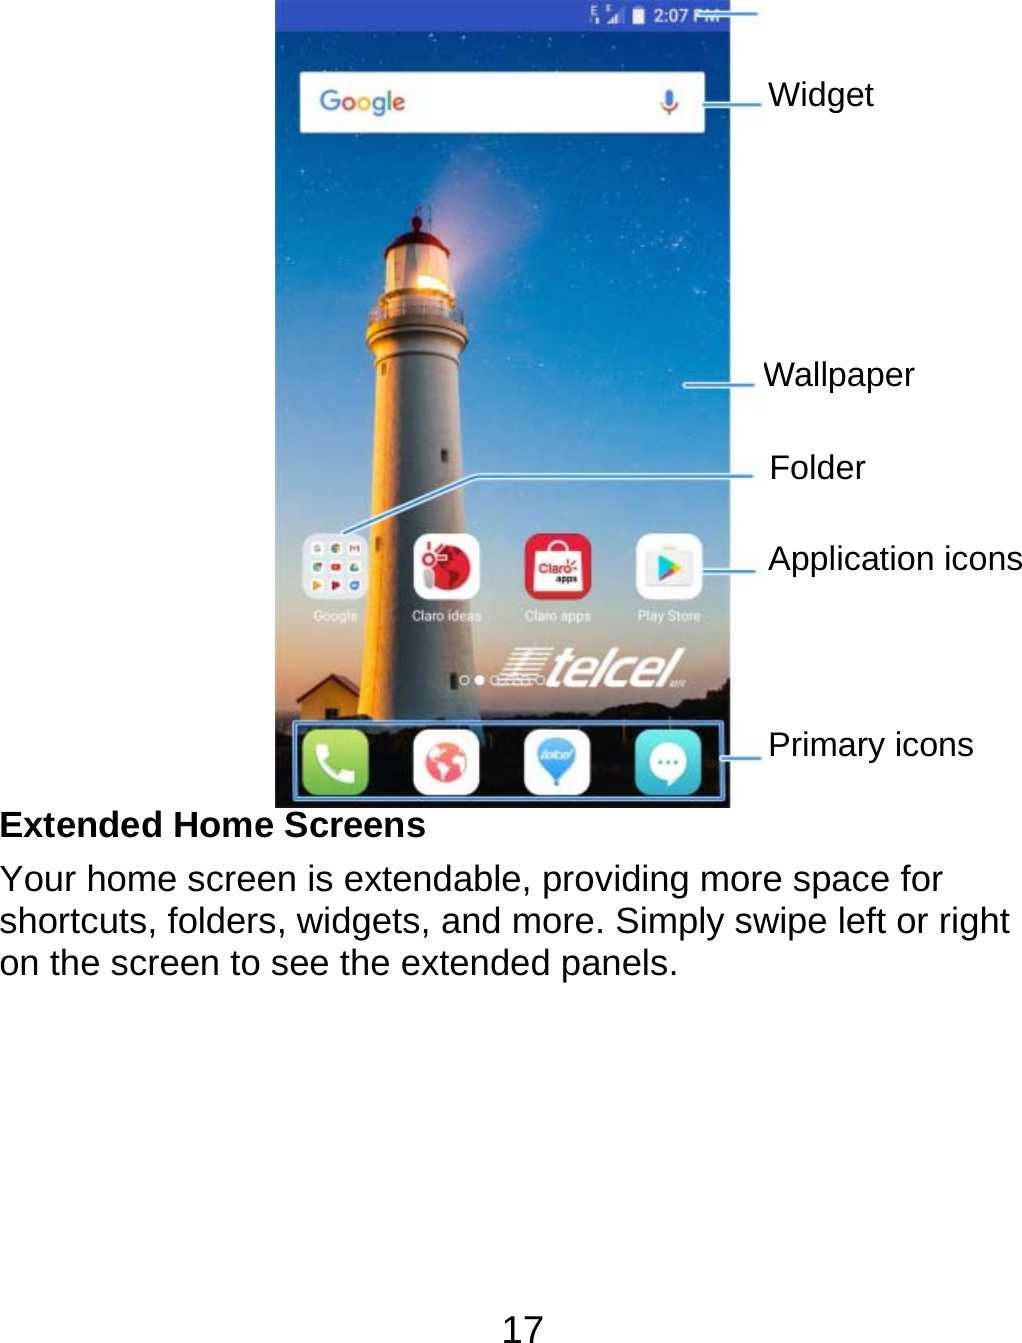  17                Extended Home Screens Your home screen is extendable, providing more space for shortcuts, folders, widgets, and more. Simply swipe left or right on the screen to see the extended panels.  Folder Application iconsPrimary icons WallpaperWidget 